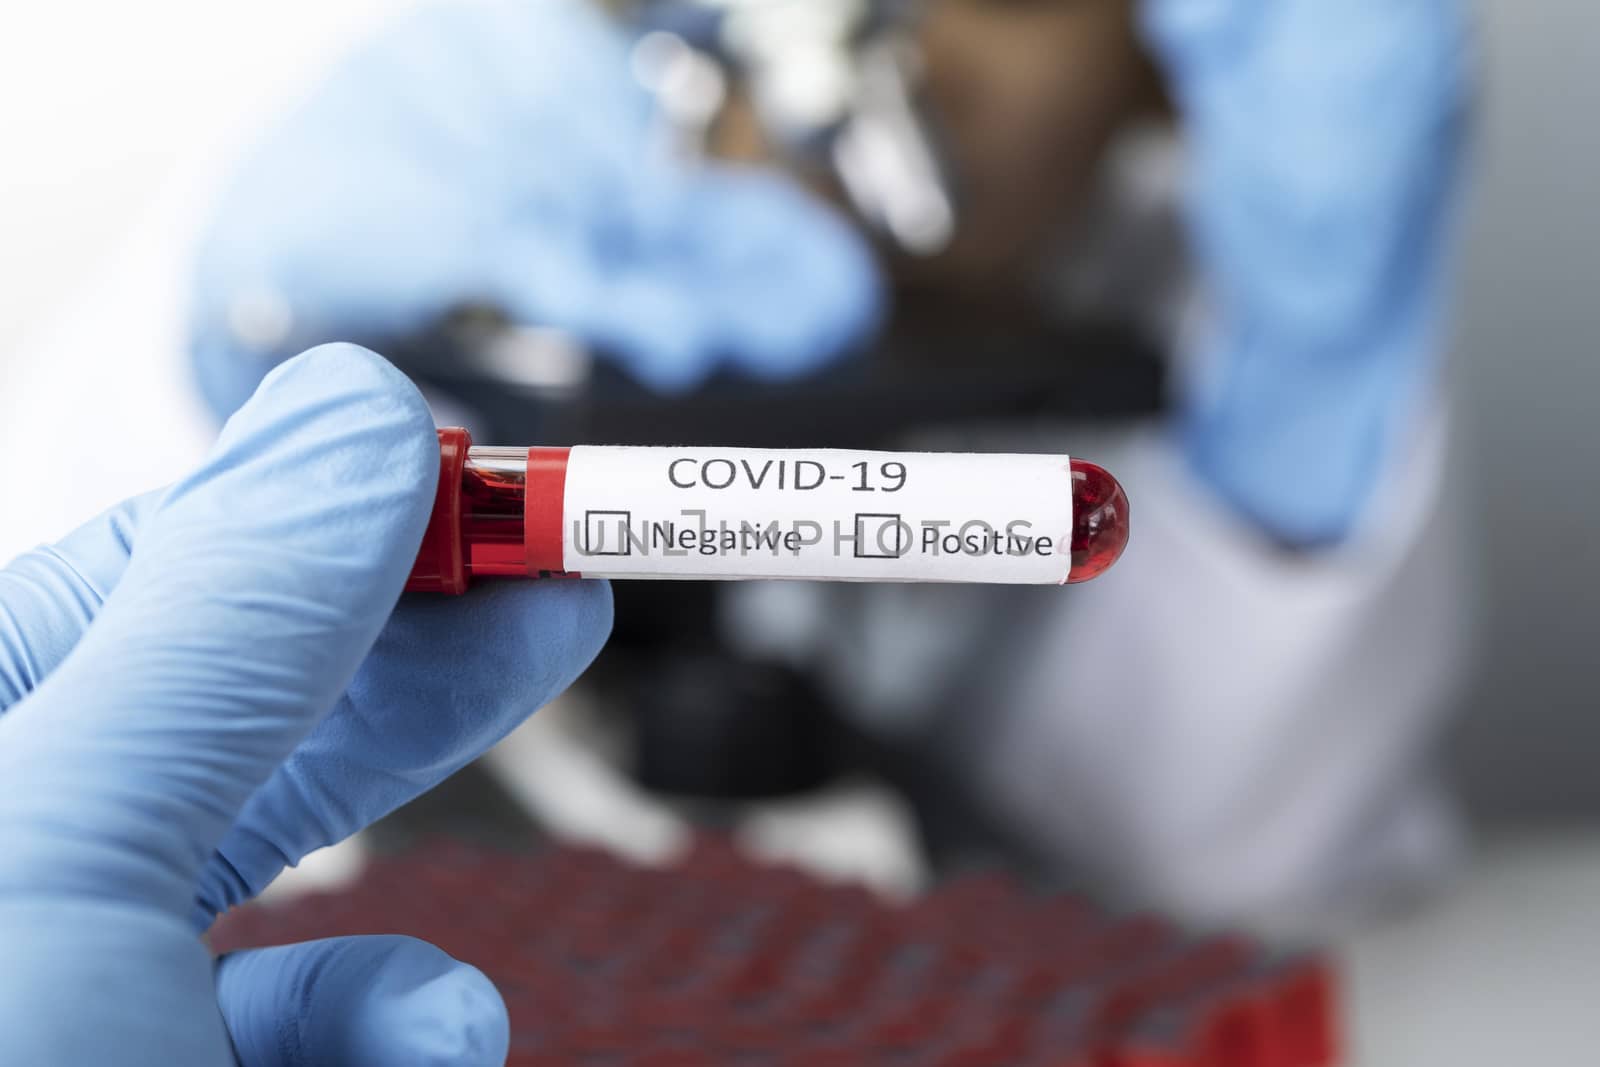 Cropped view of scientist in latex glove holding test tube with blood sample, Test tube with blood sample for COVID-19 test, novel coronavirus 2019.